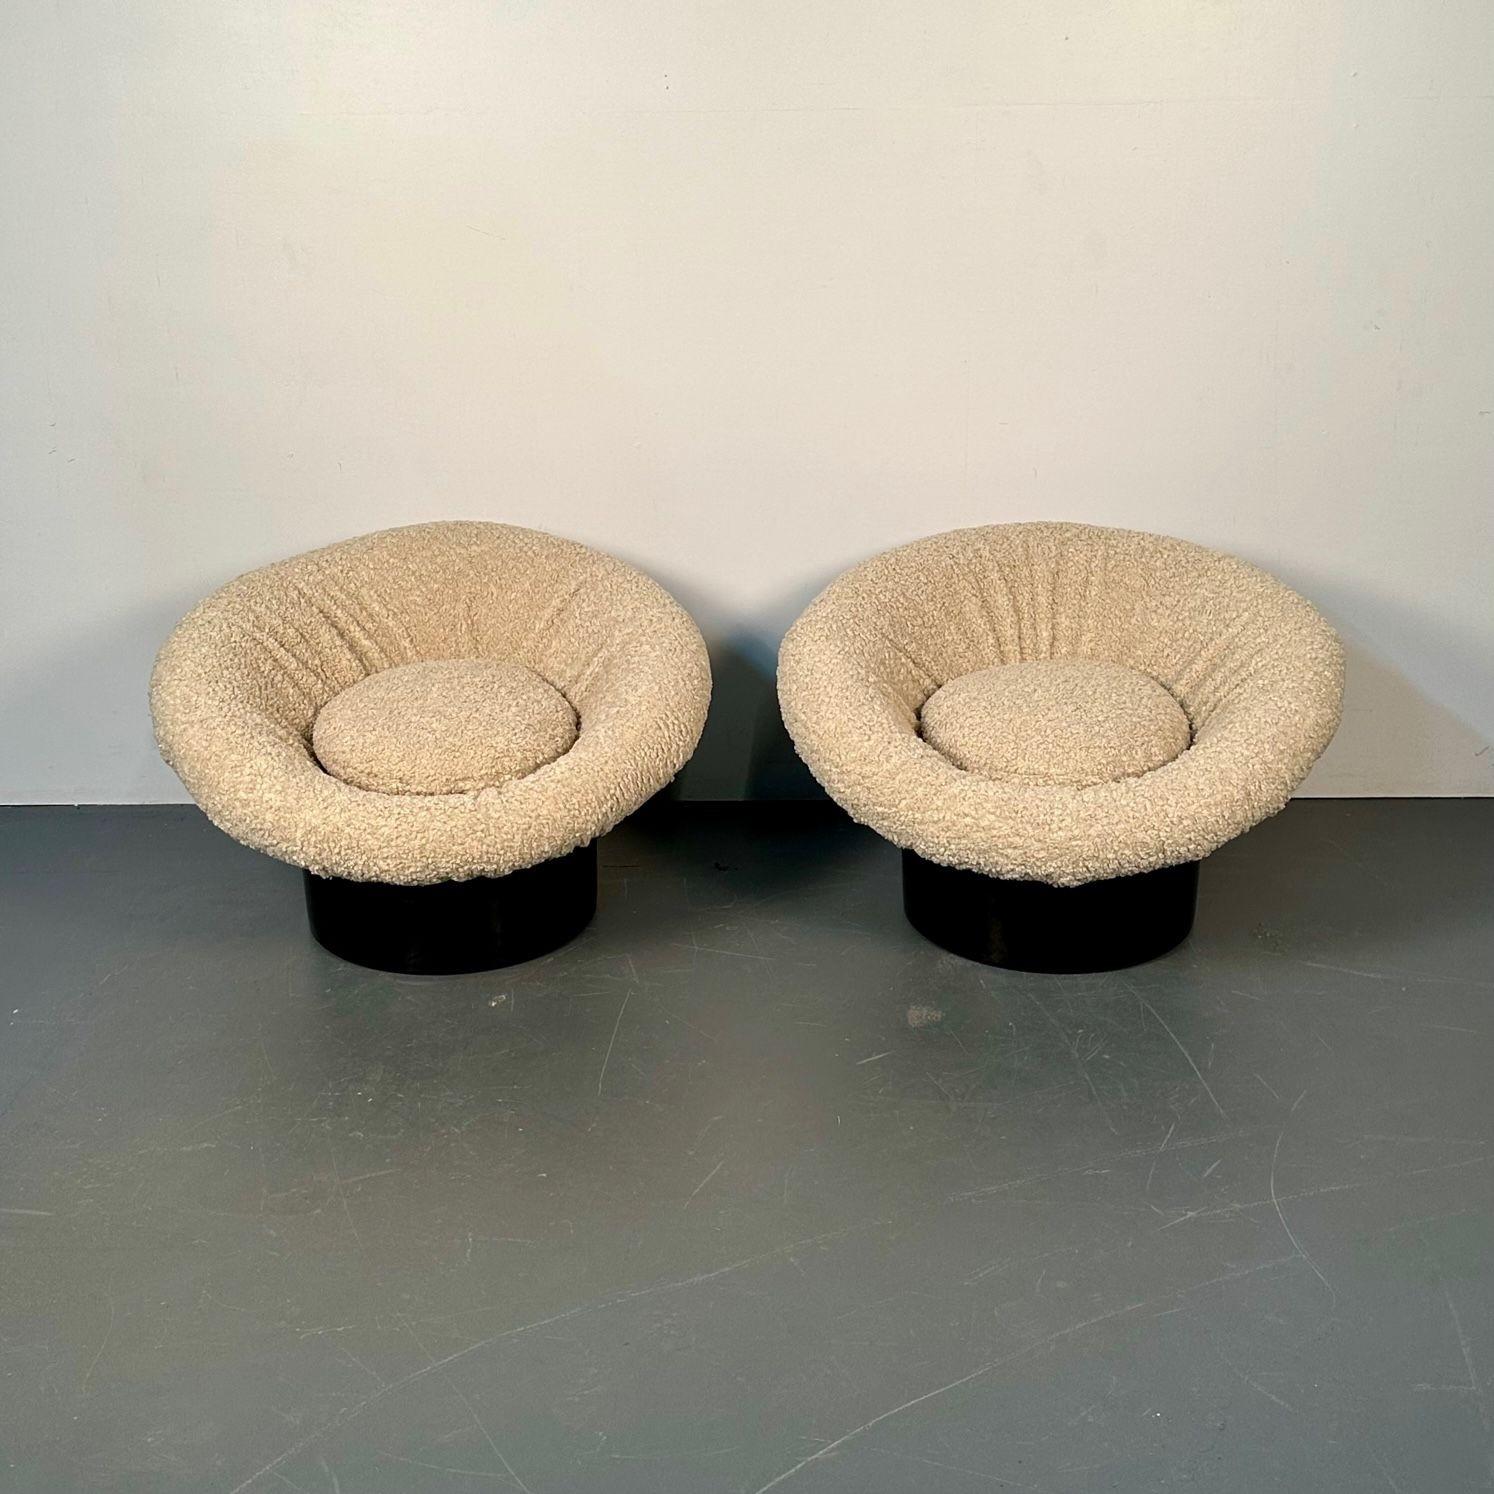 Pair of Midcentury Lacquer Lounge Chairs, Lennart Bender, Space Age Modern For Sale 2